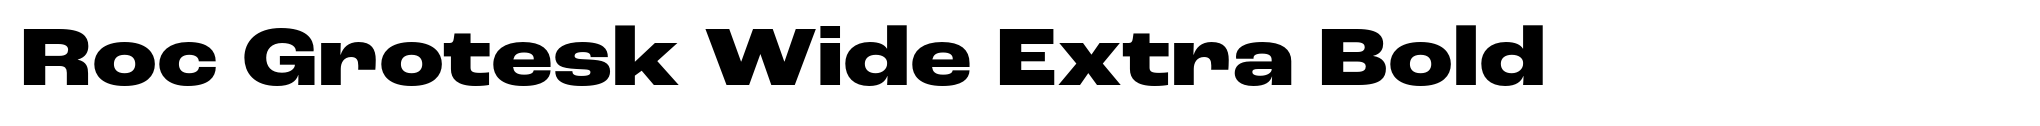 Roc Grotesk Wide Extra Bold image